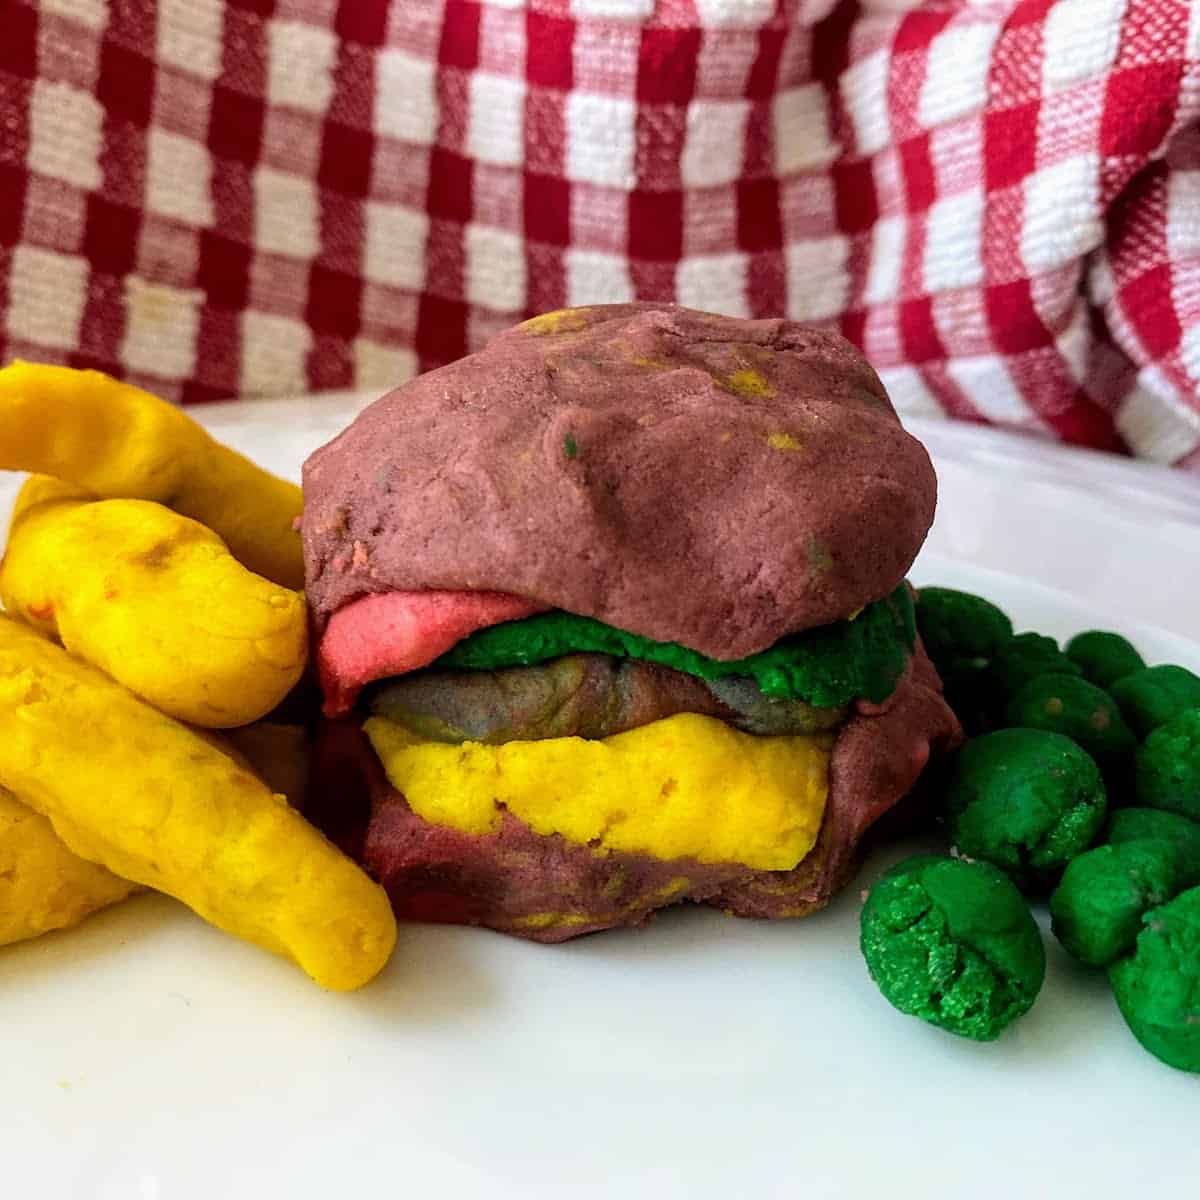 playdough burger, fries and peas against gingham tablecloth